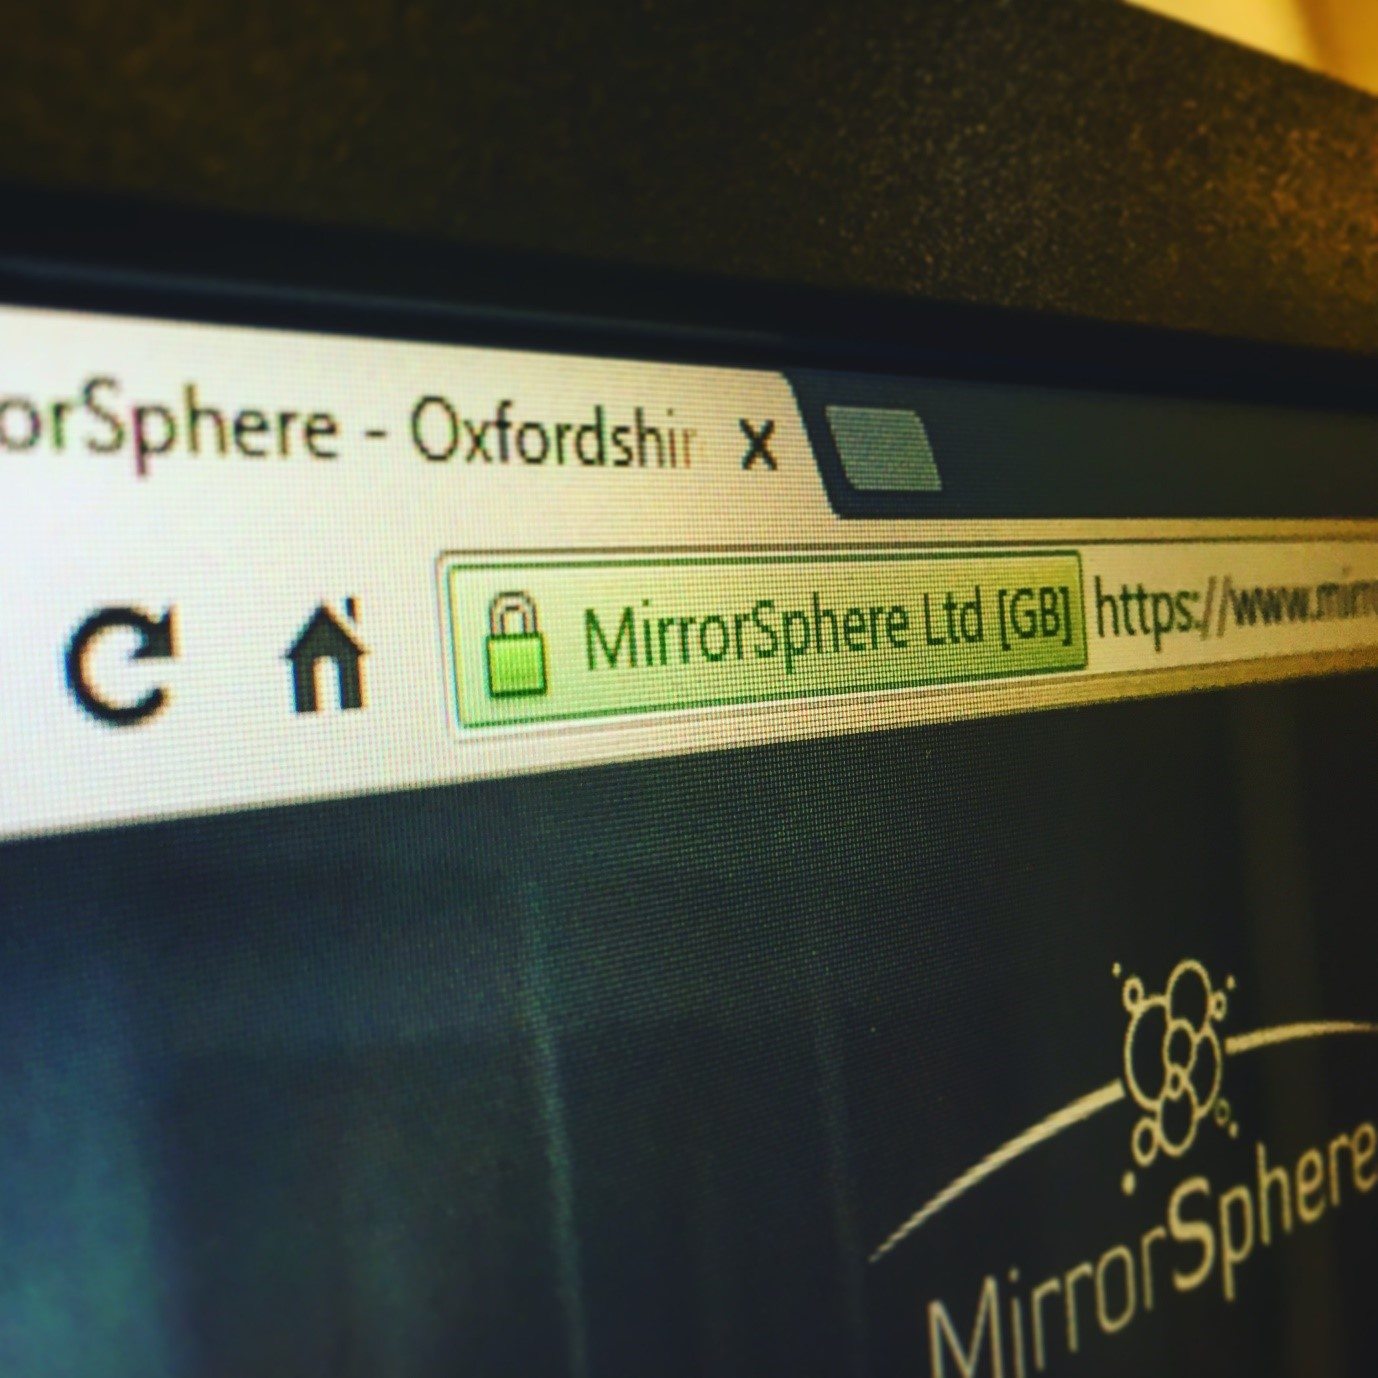 Photo of the MirrorSphere website URL with Padlock.